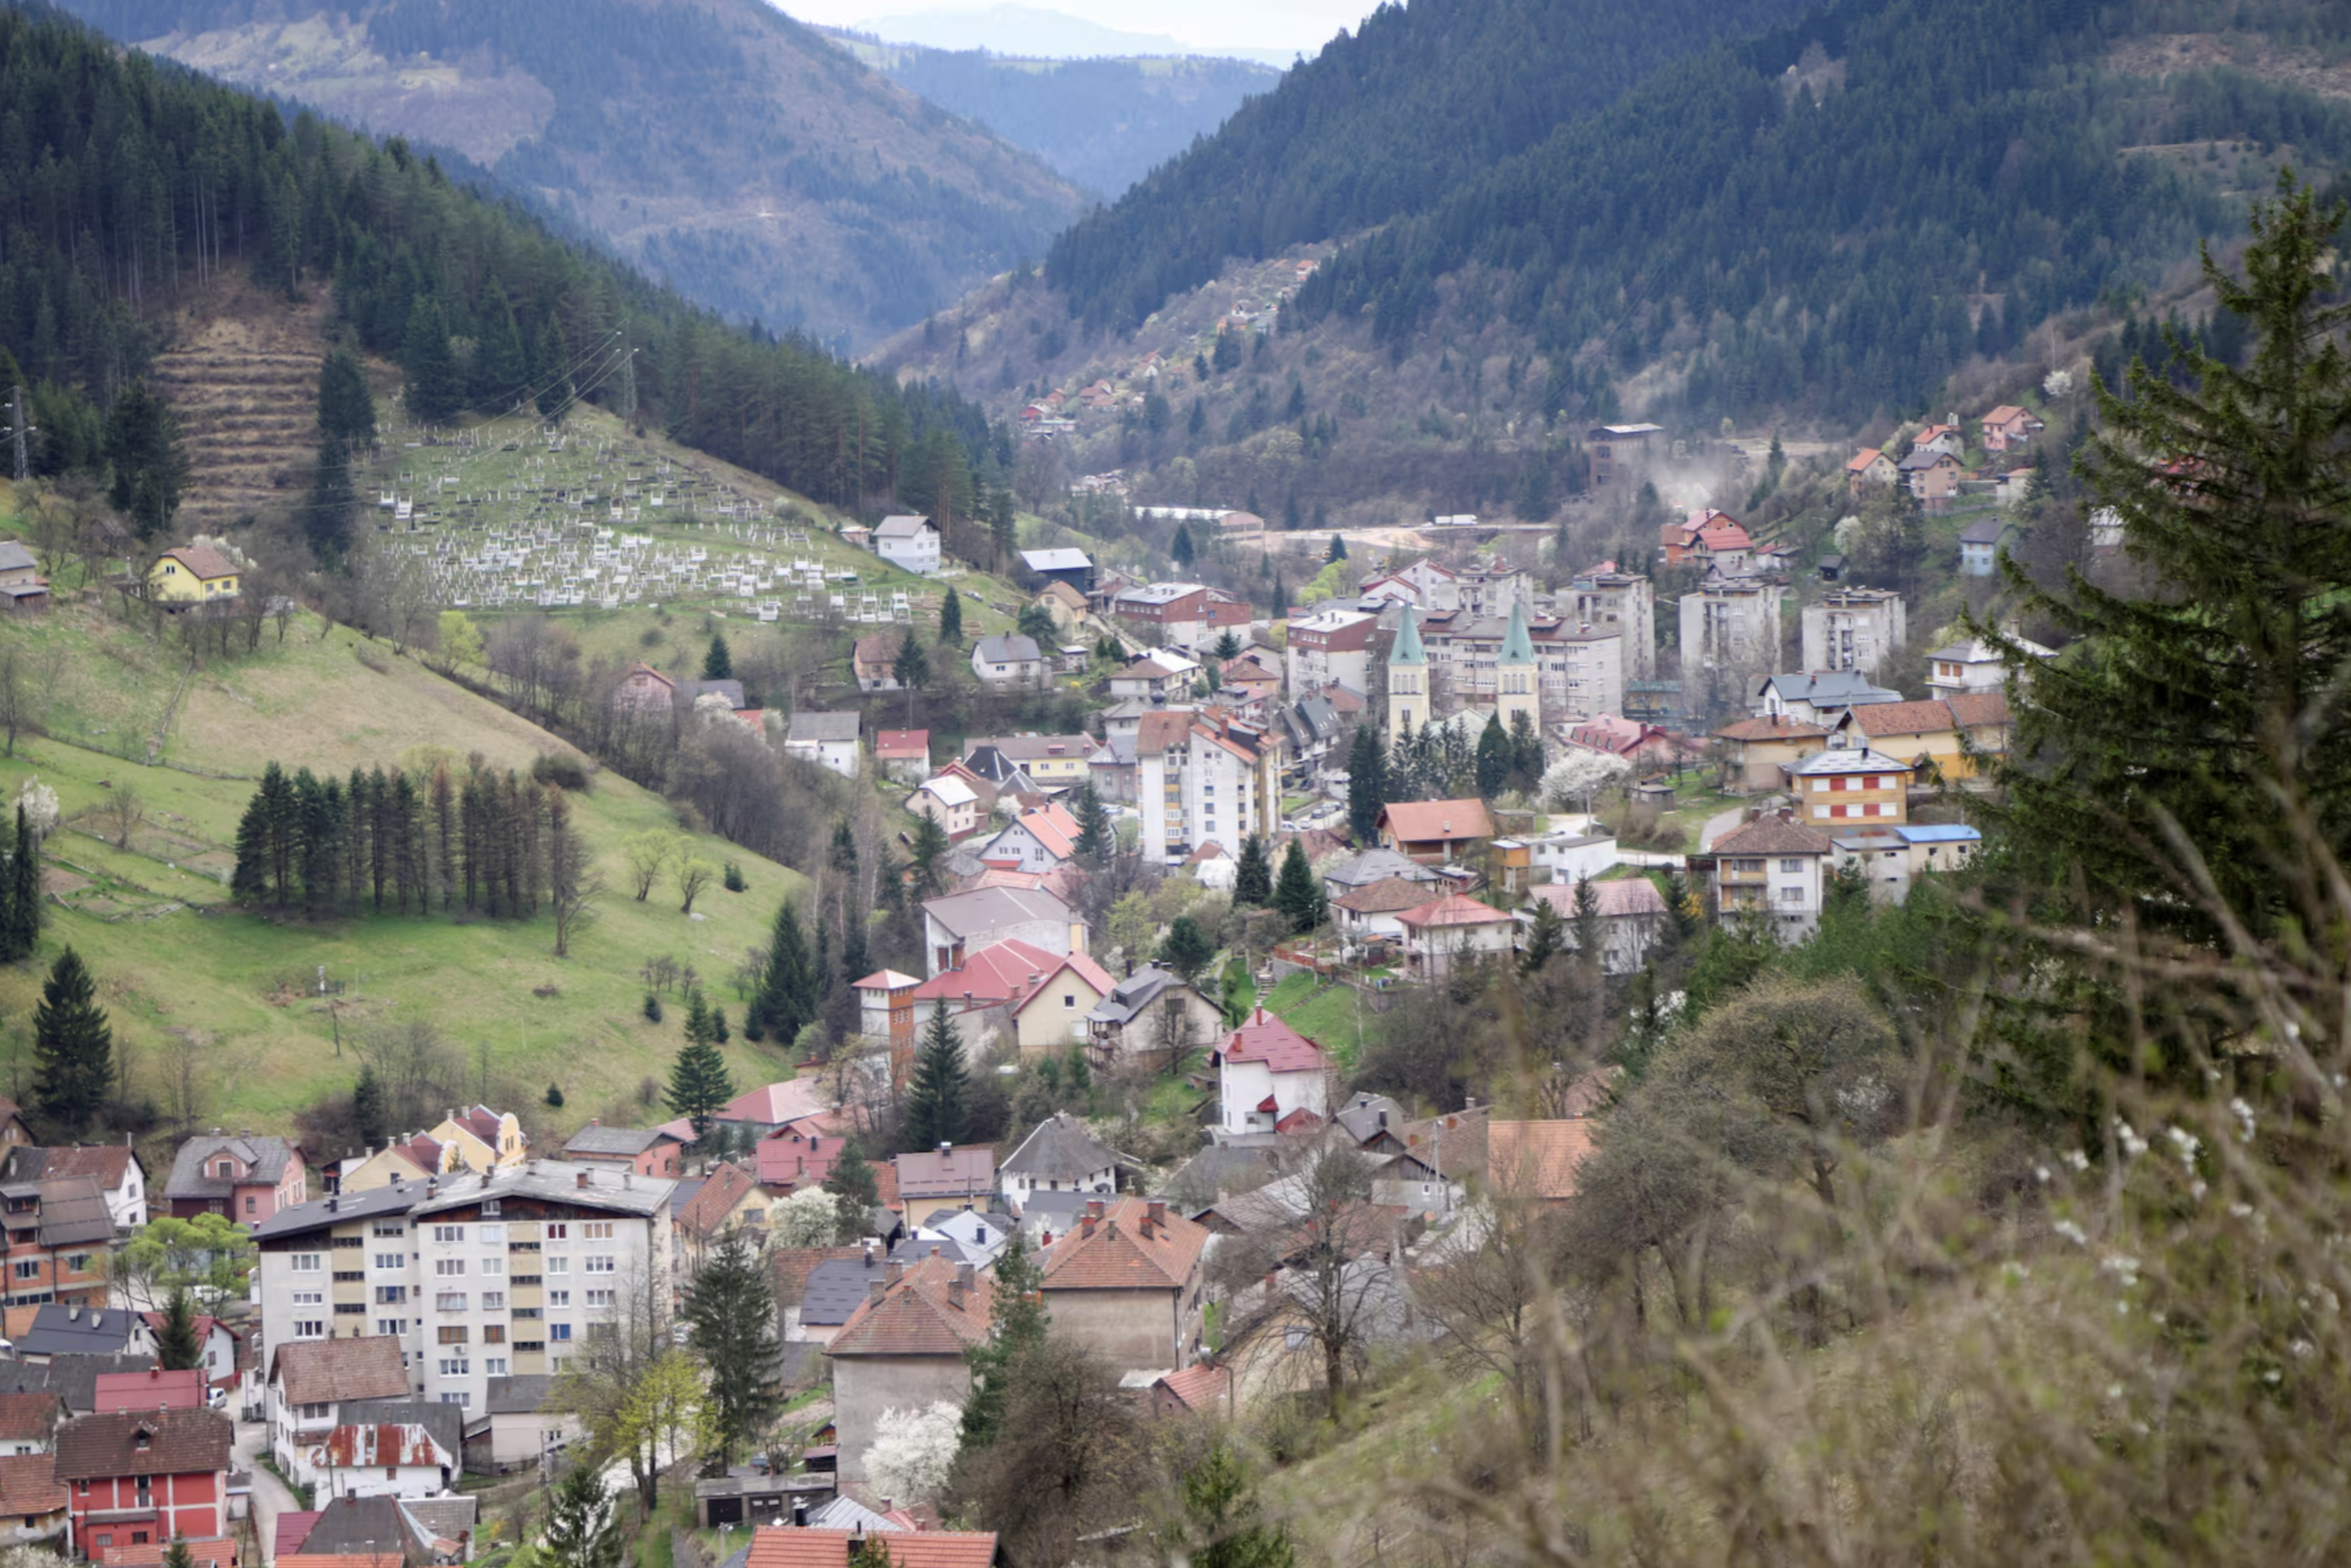 A silver mine revives neglected Bosnian town